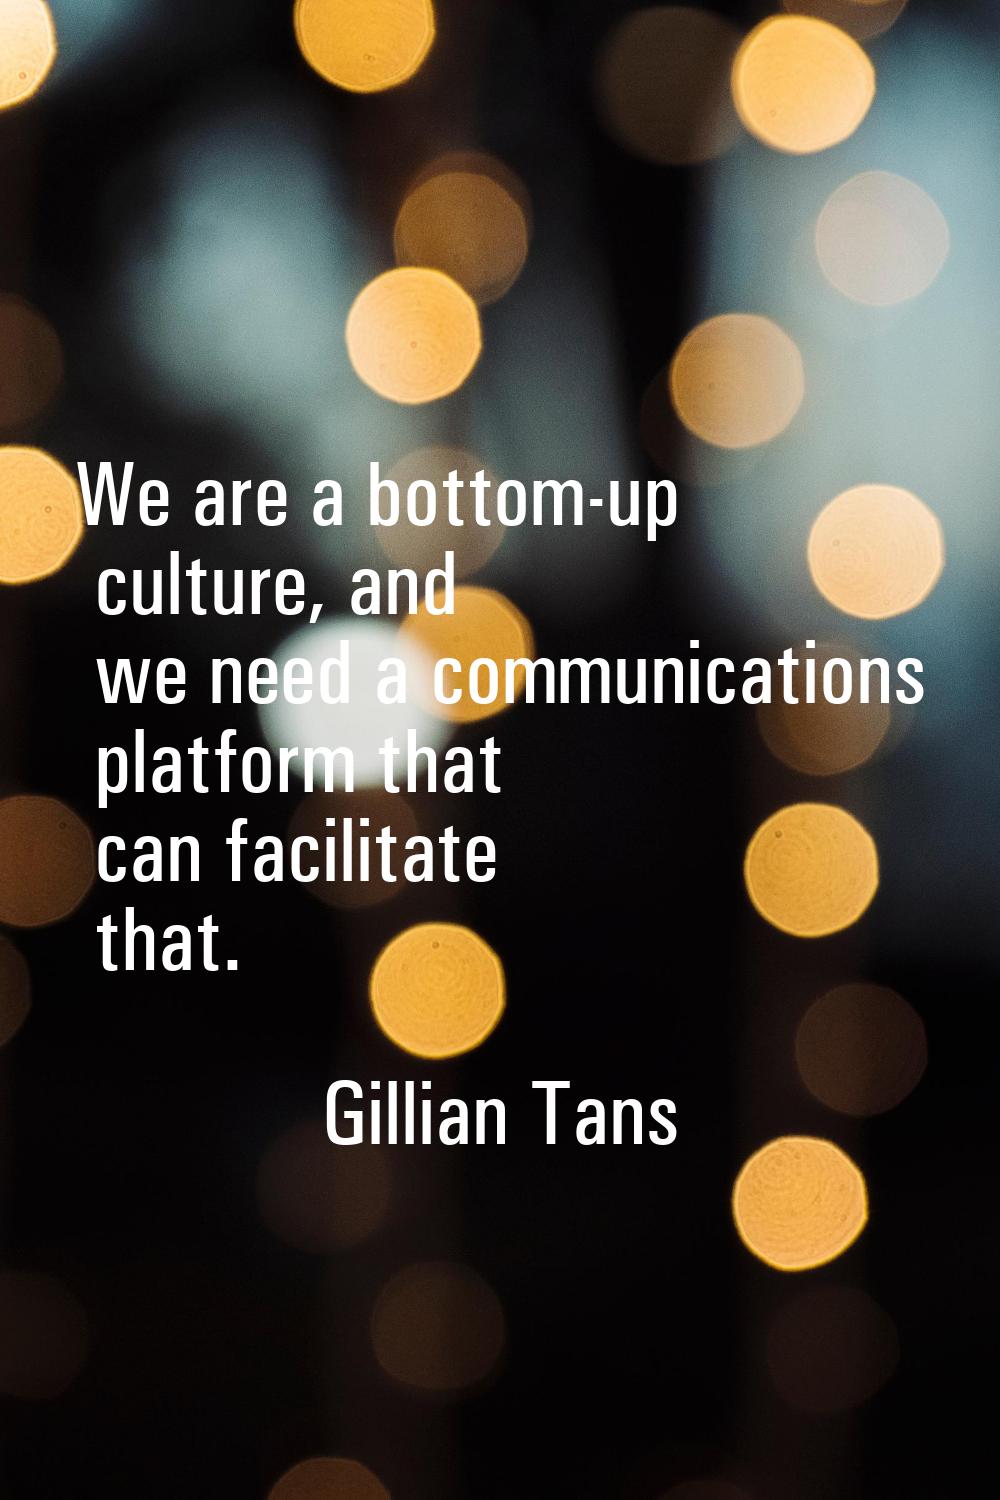 We are a bottom-up culture, and we need a communications platform that can facilitate that.